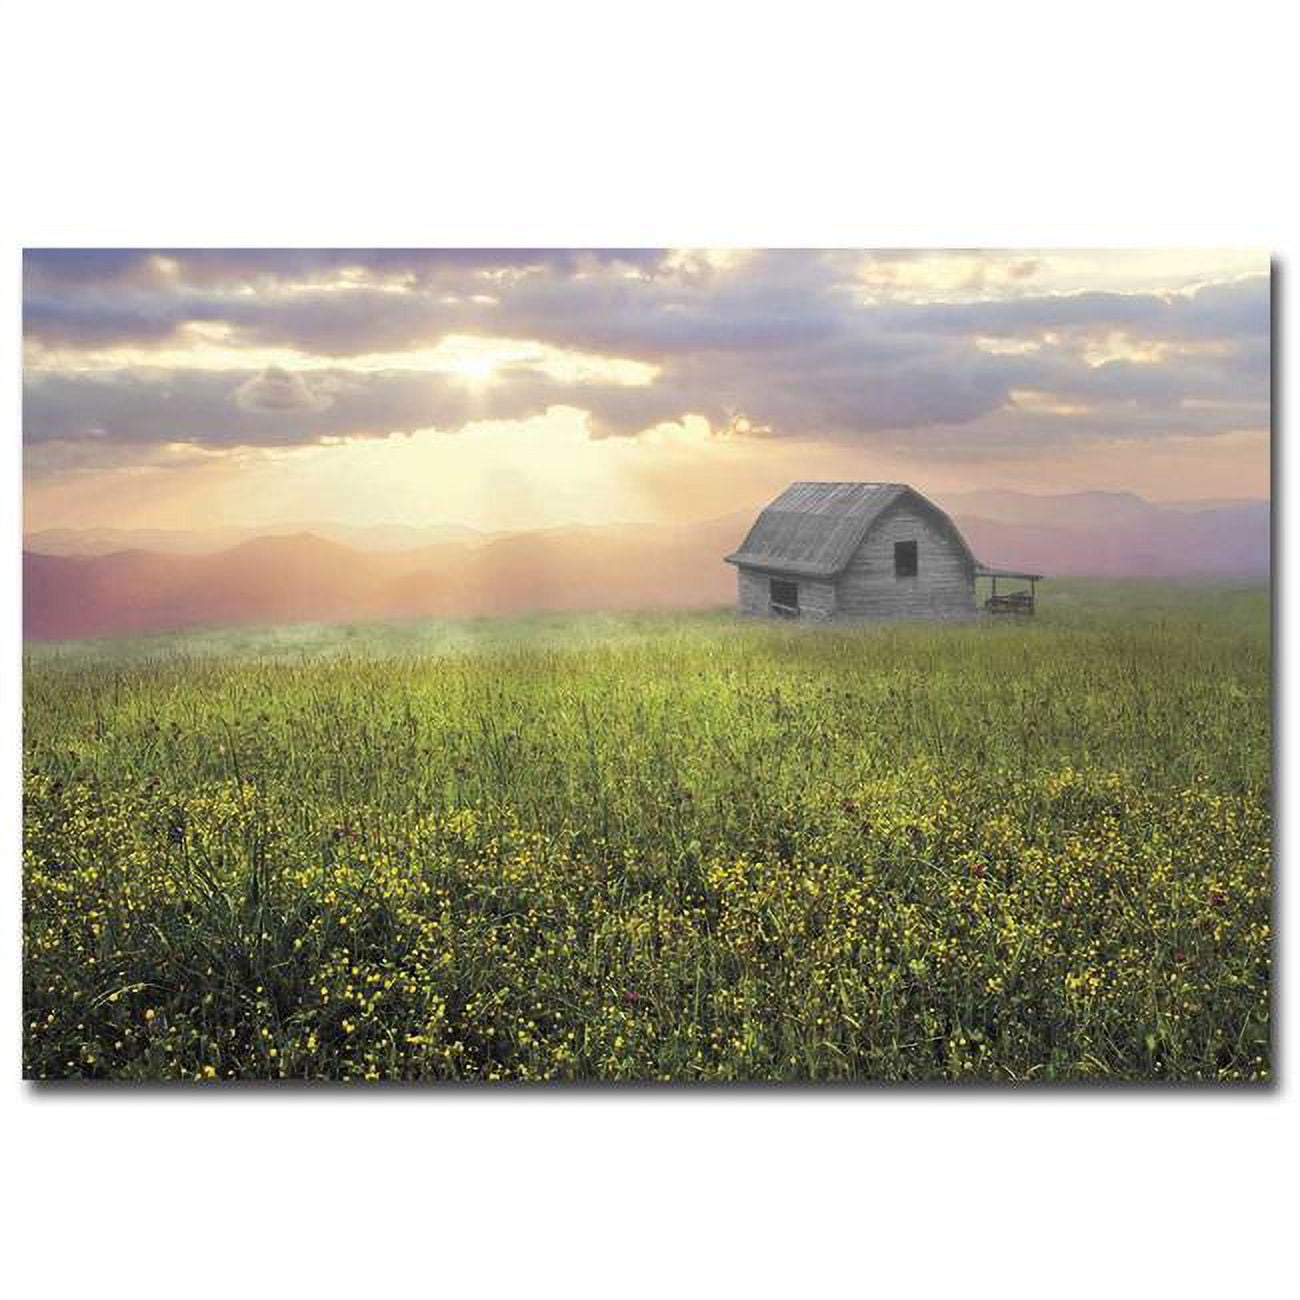 3045i795cg Morning Has Broken By Celebrate Life Gallery Premium Oversize Gallery-wrapped Canvas Giclee Panorama Art - 30 X 45 X 1.5 In.